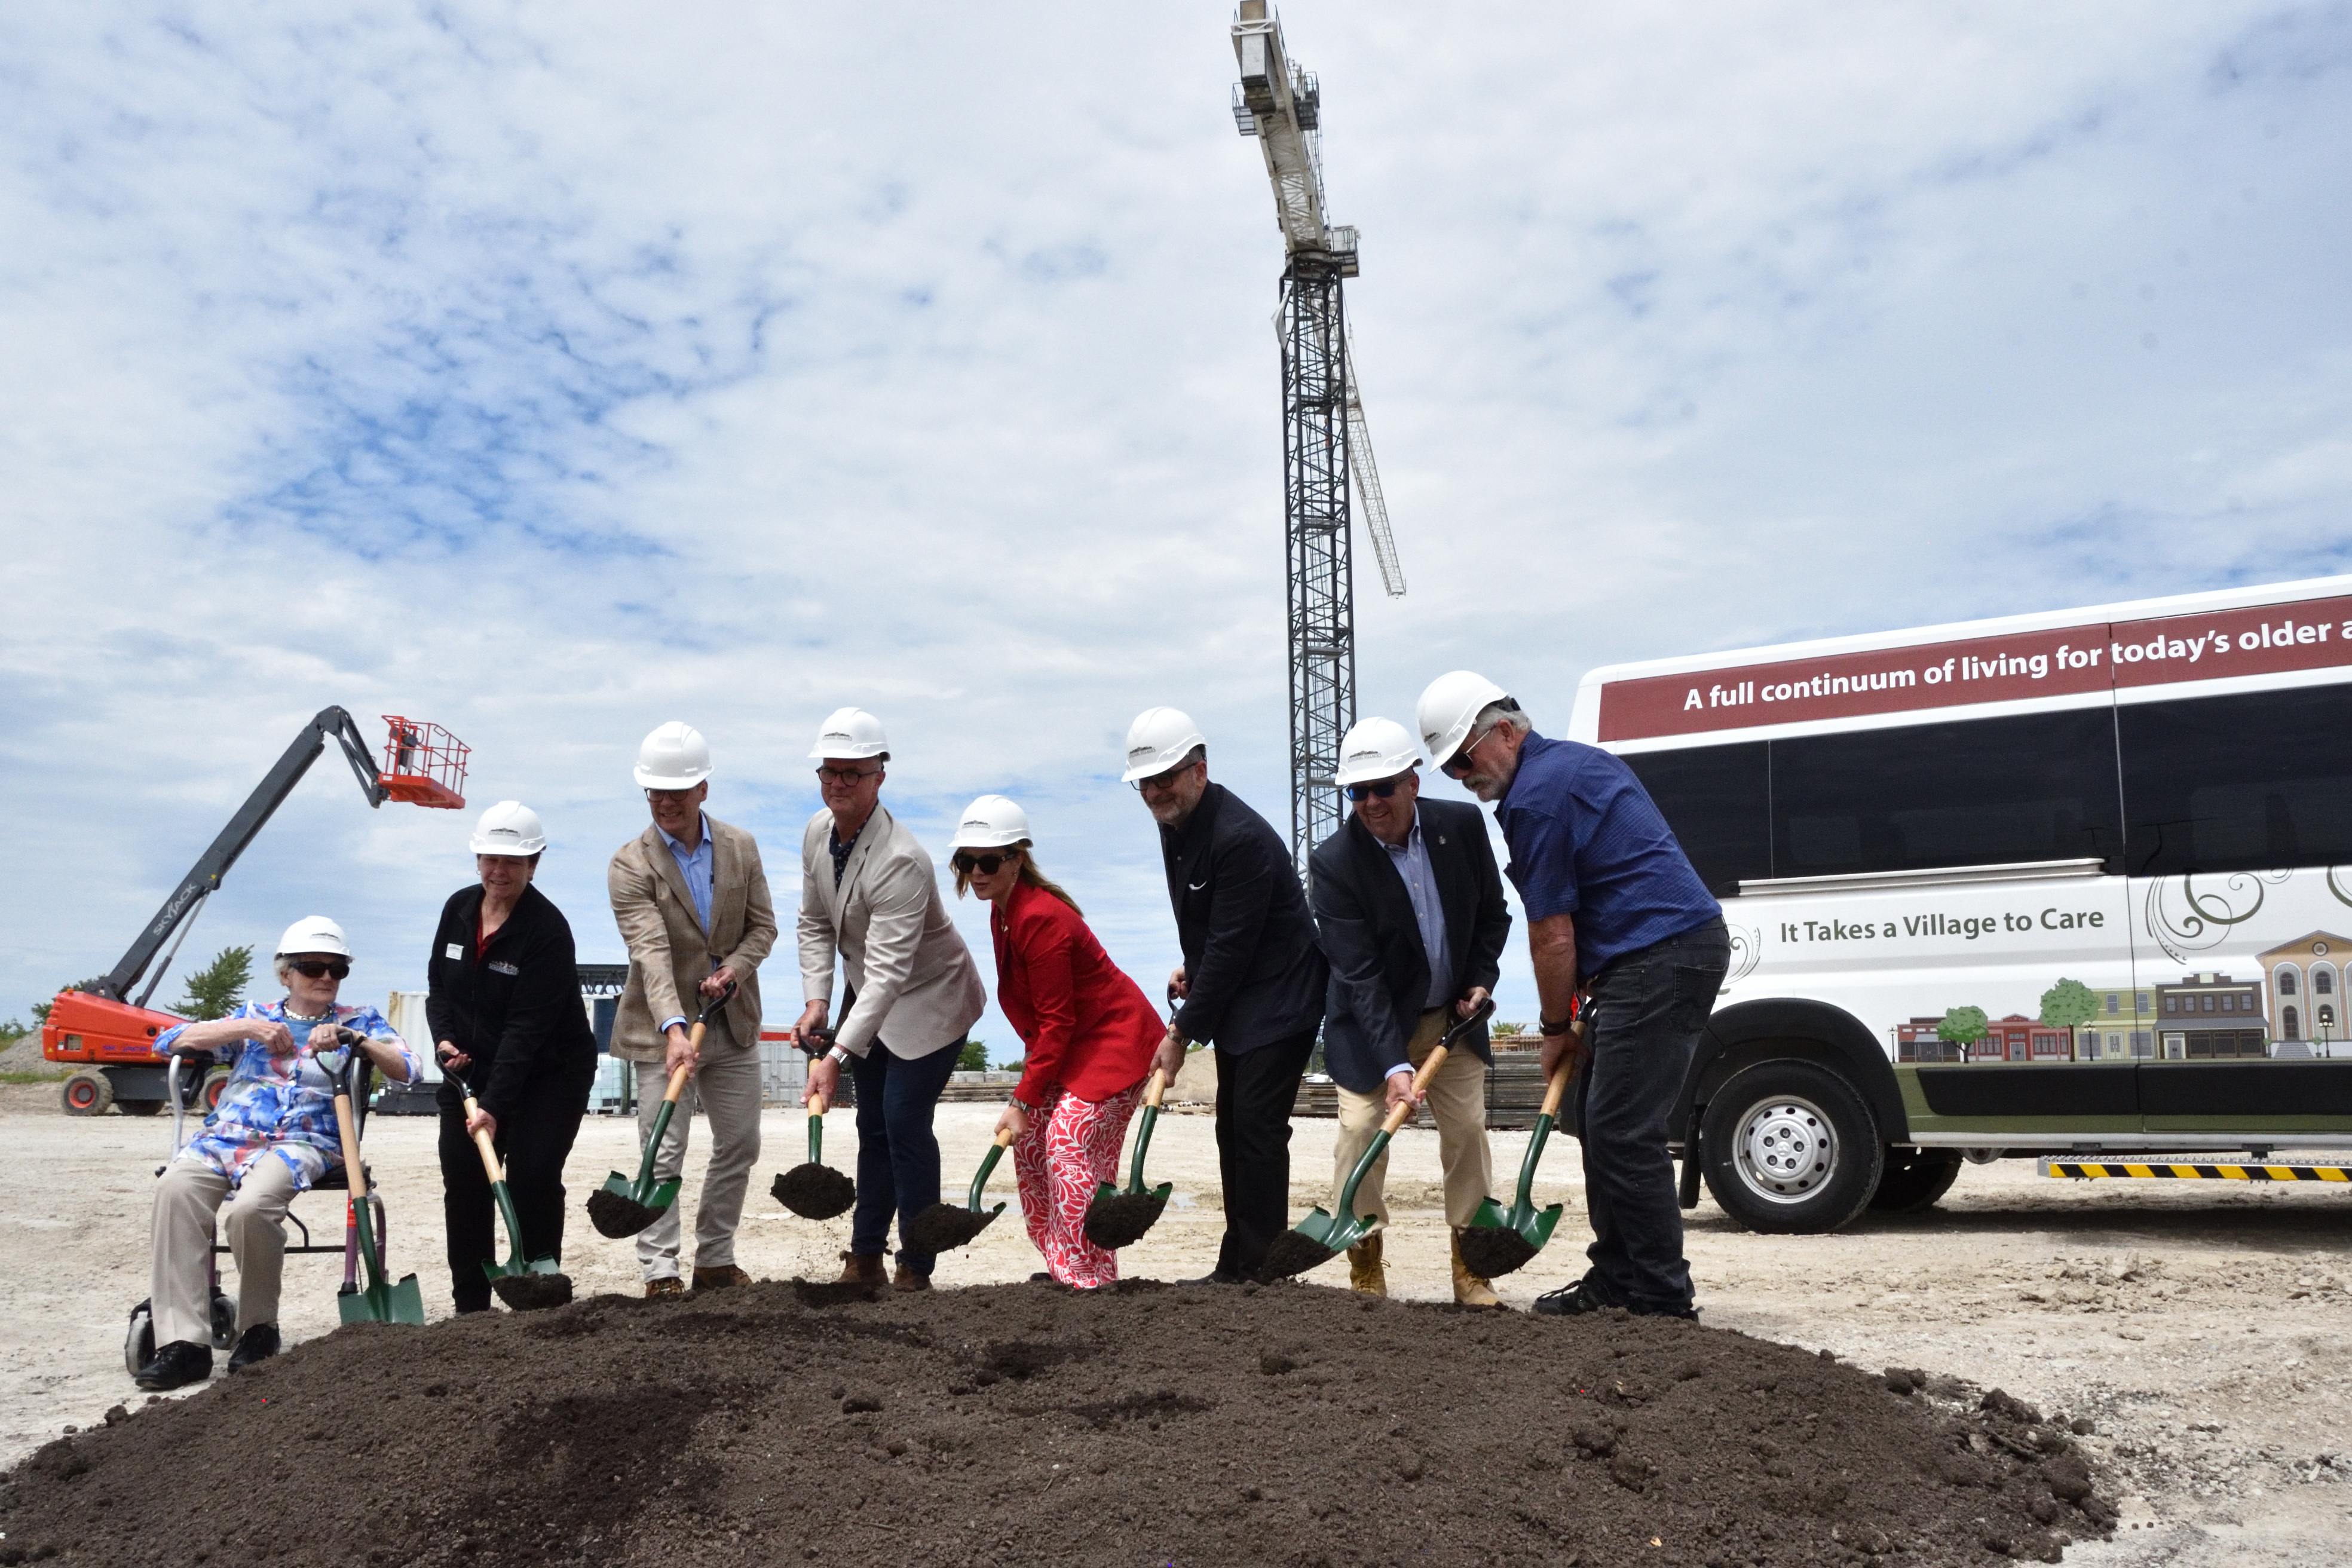 Dignitaries turn dirt on the construction site during the announcement of a new Schlegel Village long-term care in Whitchurch-Stouffville, The Village of Stouffer Mills